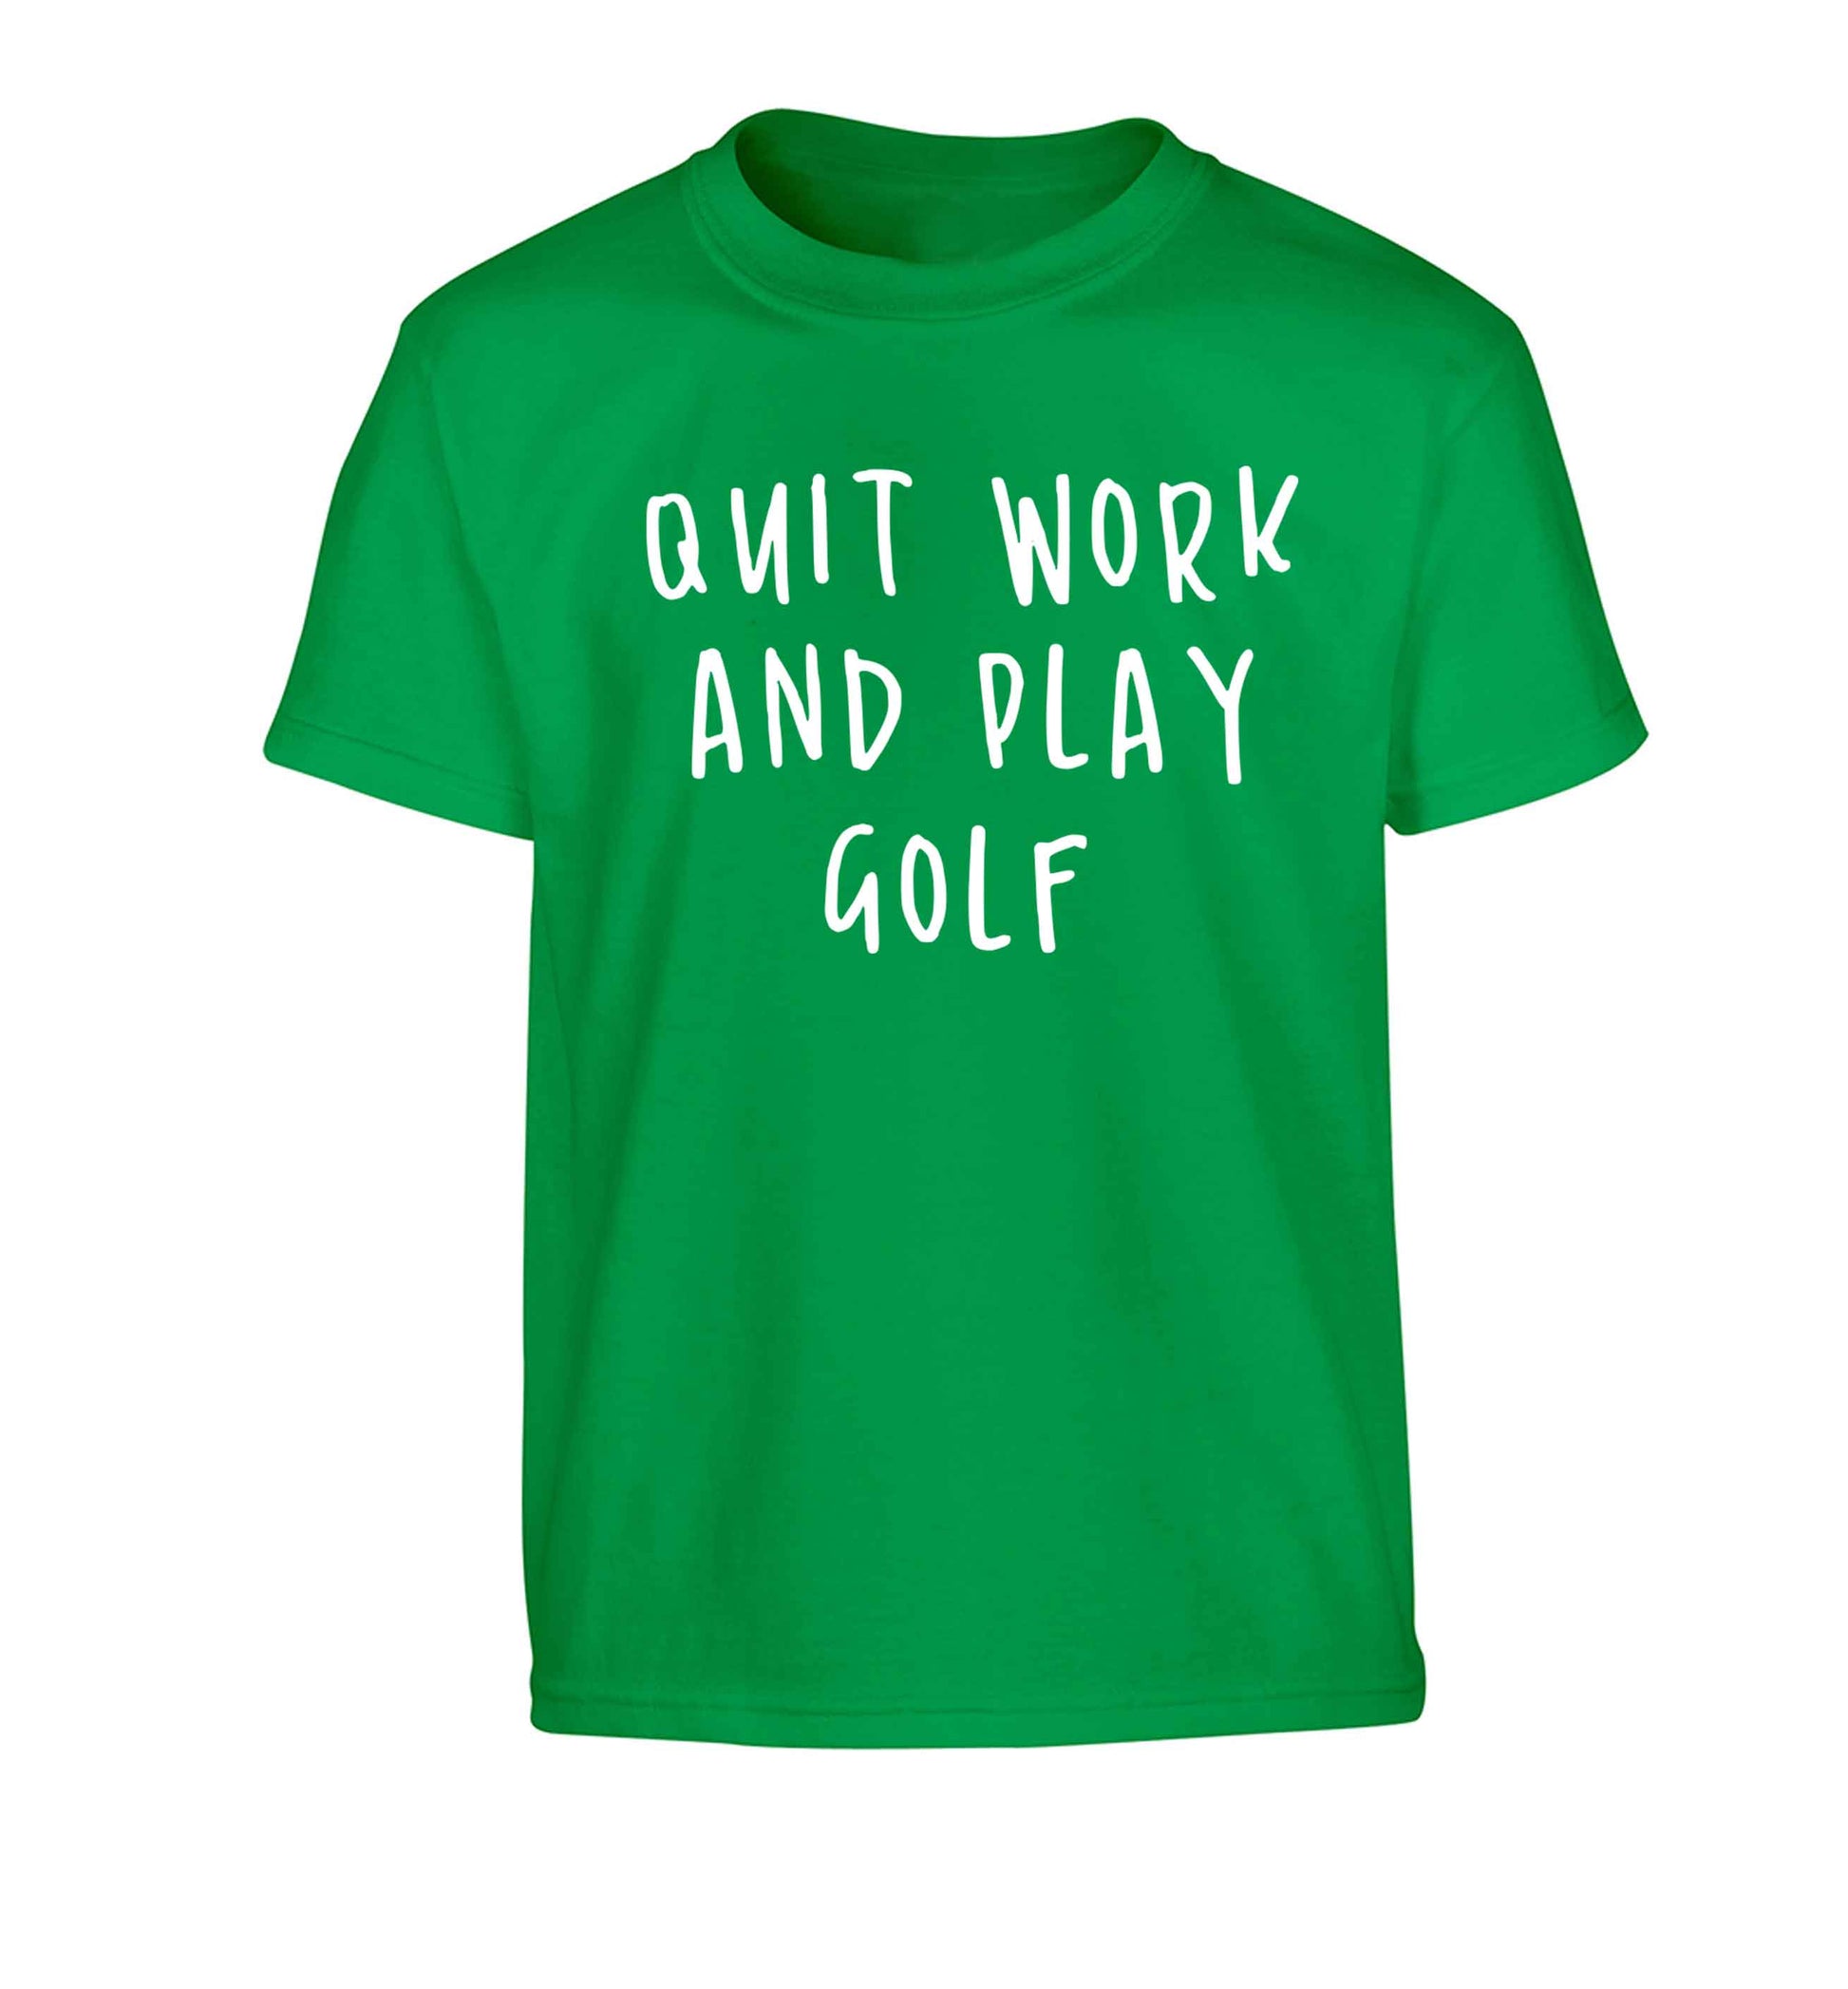 Quit work and play golf Children's green Tshirt 12-13 Years